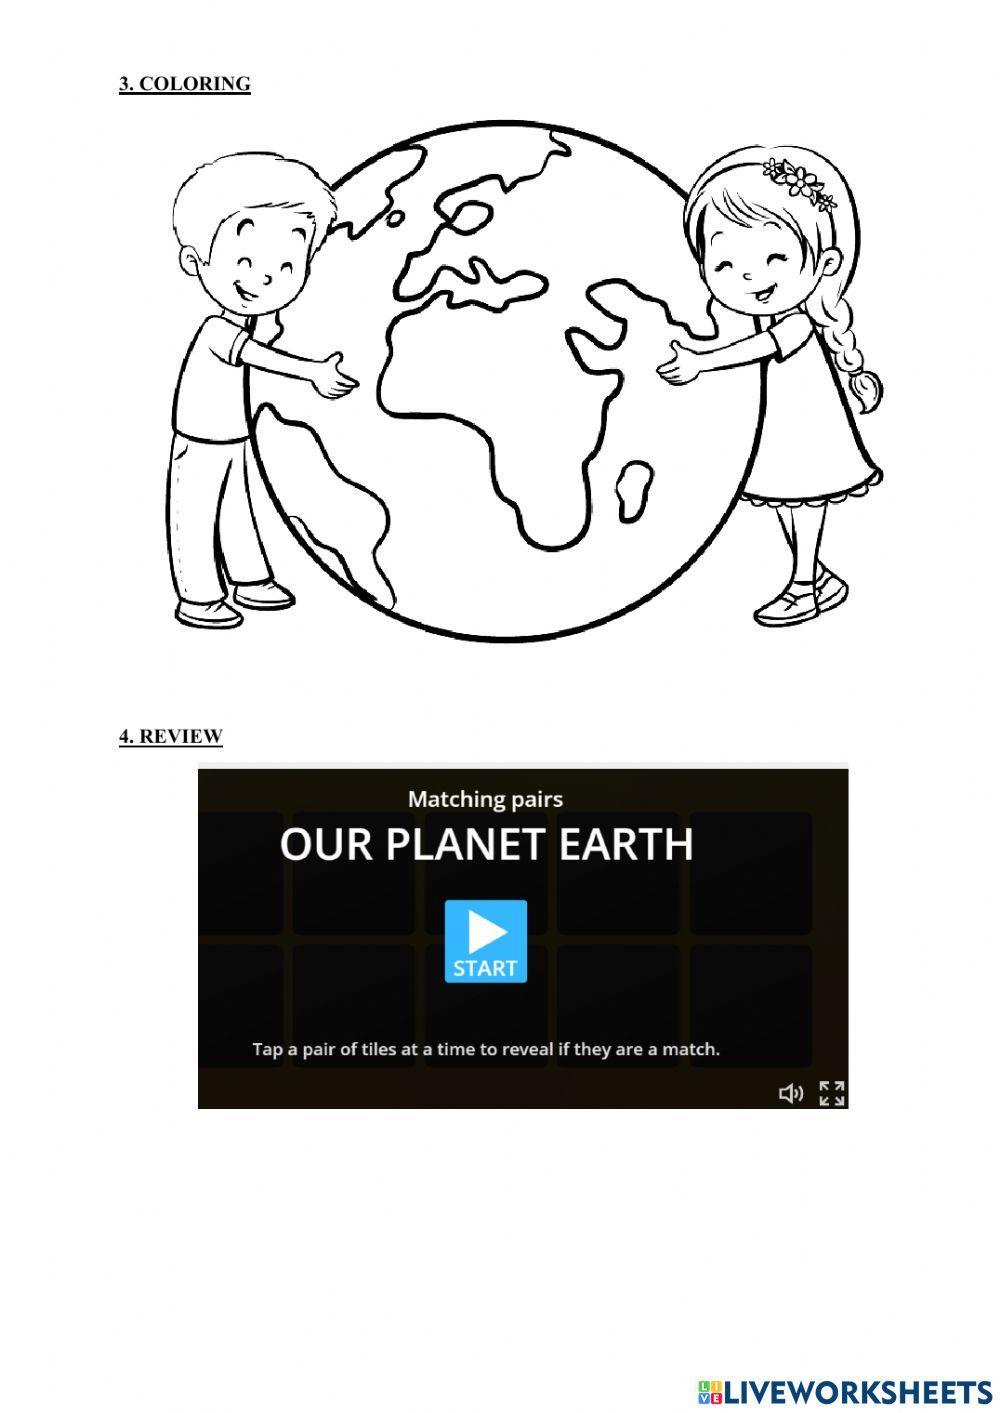 Lesson 1. our planet earth